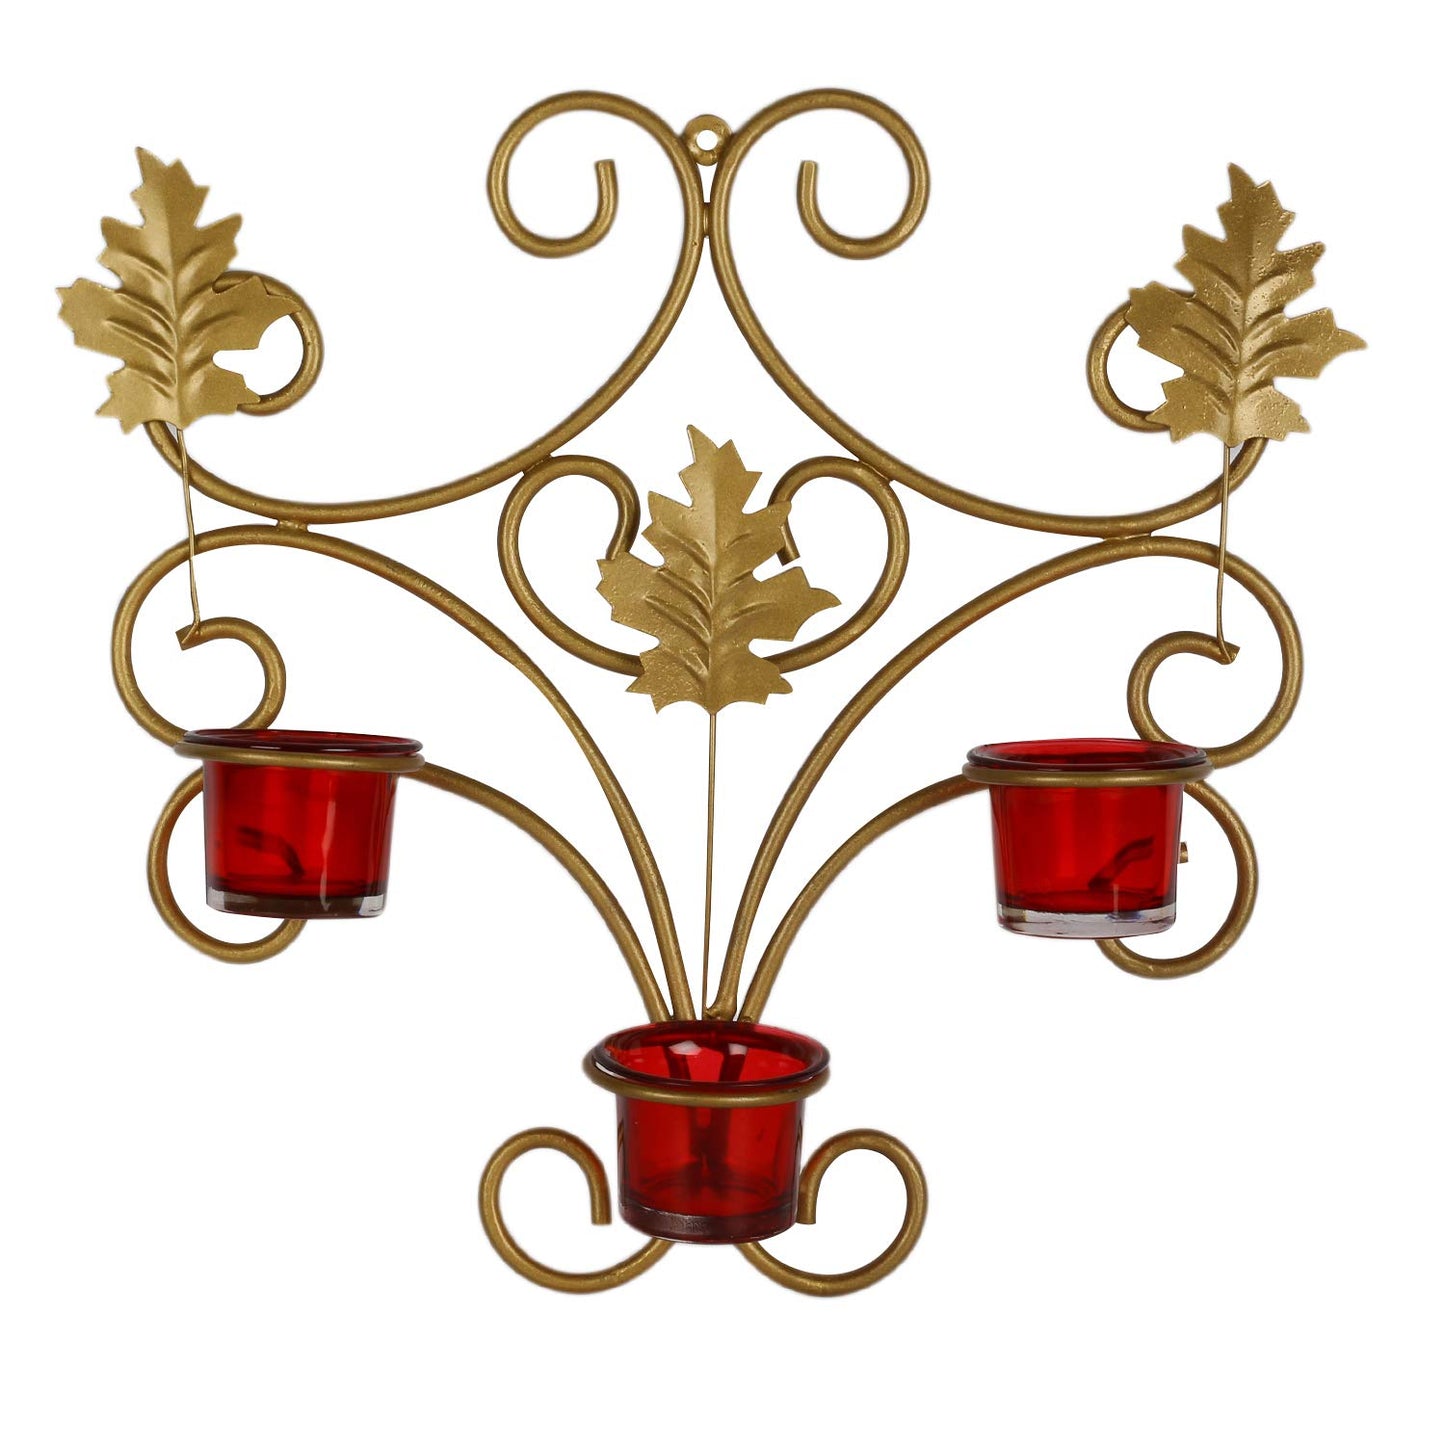 Homesparkle Wall Hanging Decorative Iron Wall Sconce Votive Candle Holder for Birthday, Diwali with Glass TeaLight Candle Stand kit for Home, Room and Mandir| Set of 1 - Candle Holder (Gold)